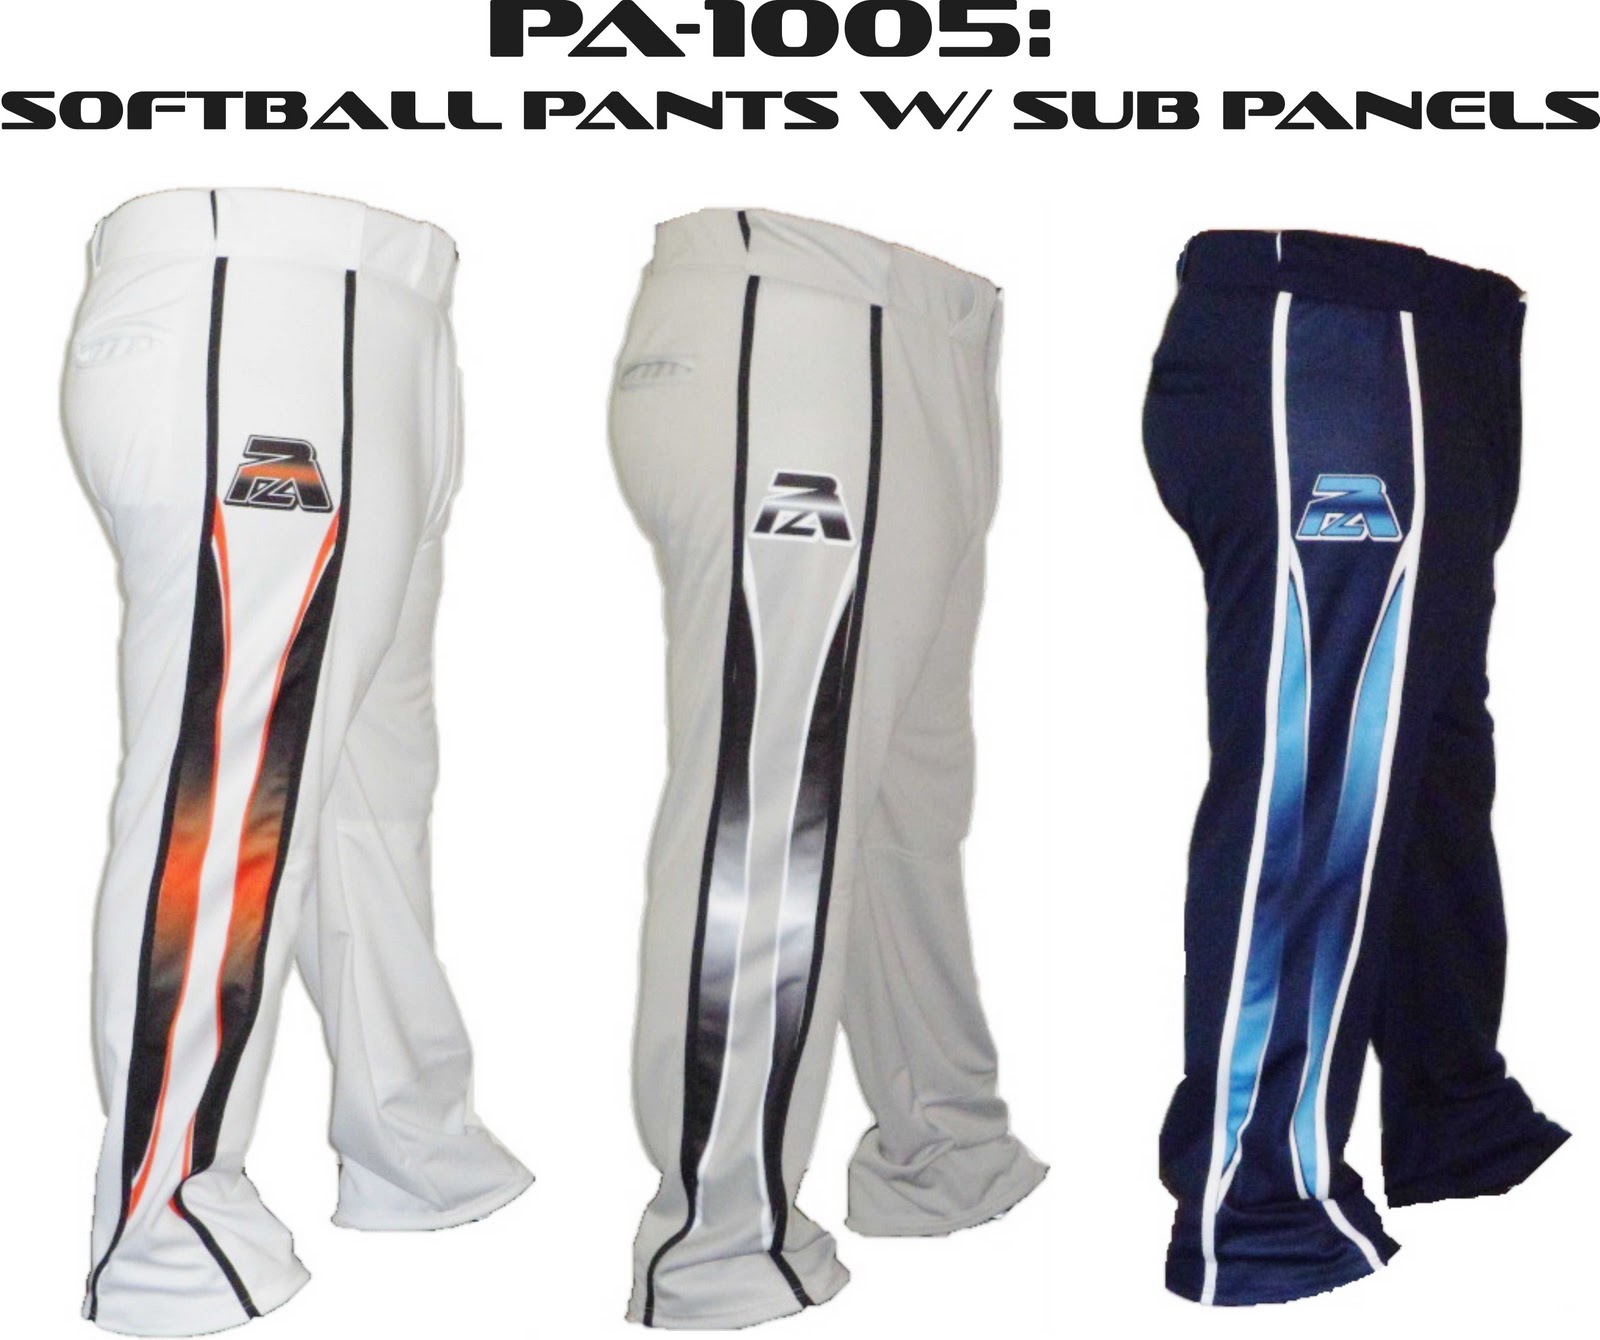 In Size Charttensity Softball Pants